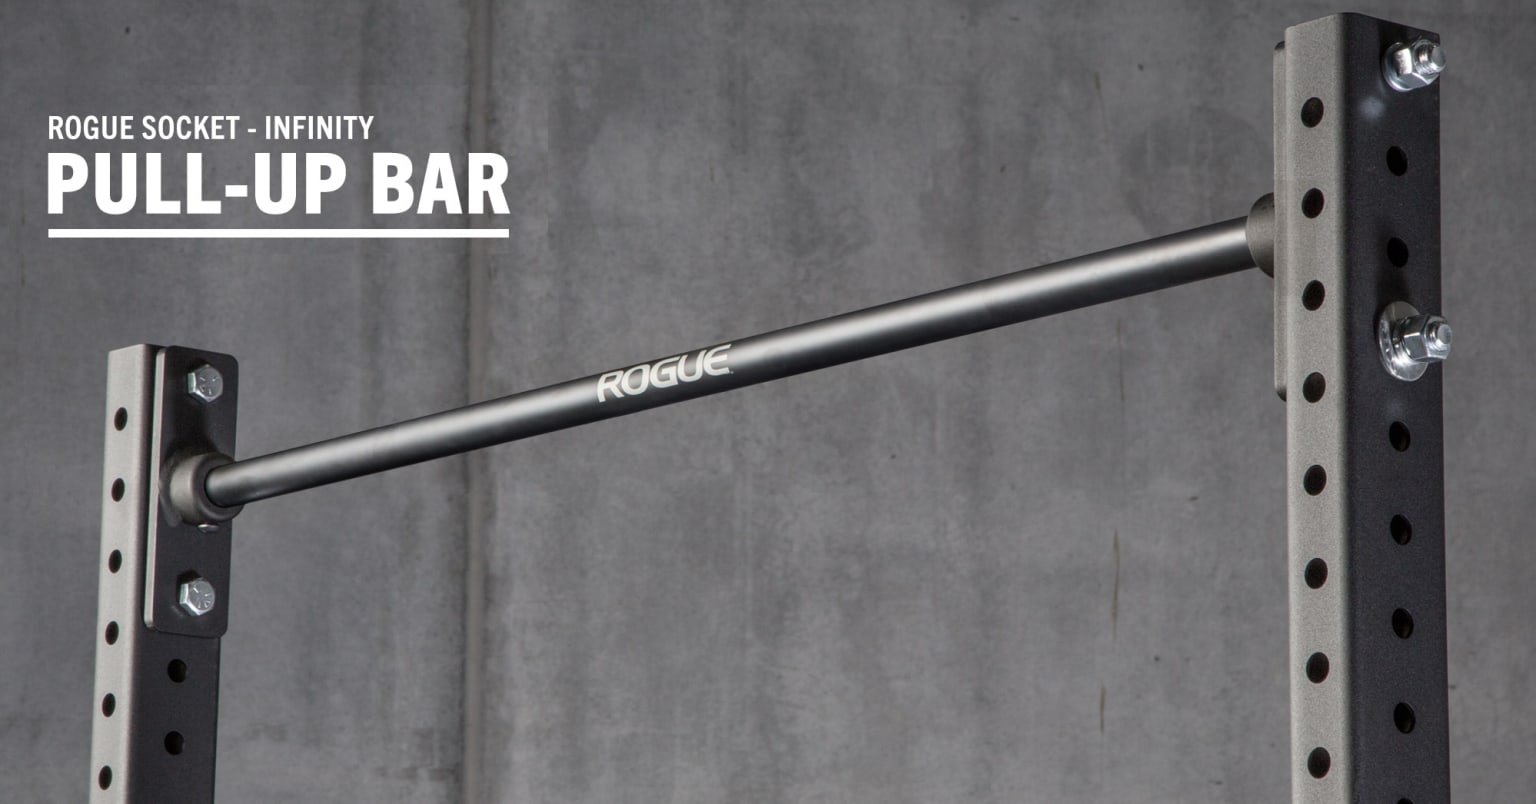 Modular Pull Up Bar | Pull Up bar made of very resistant steel